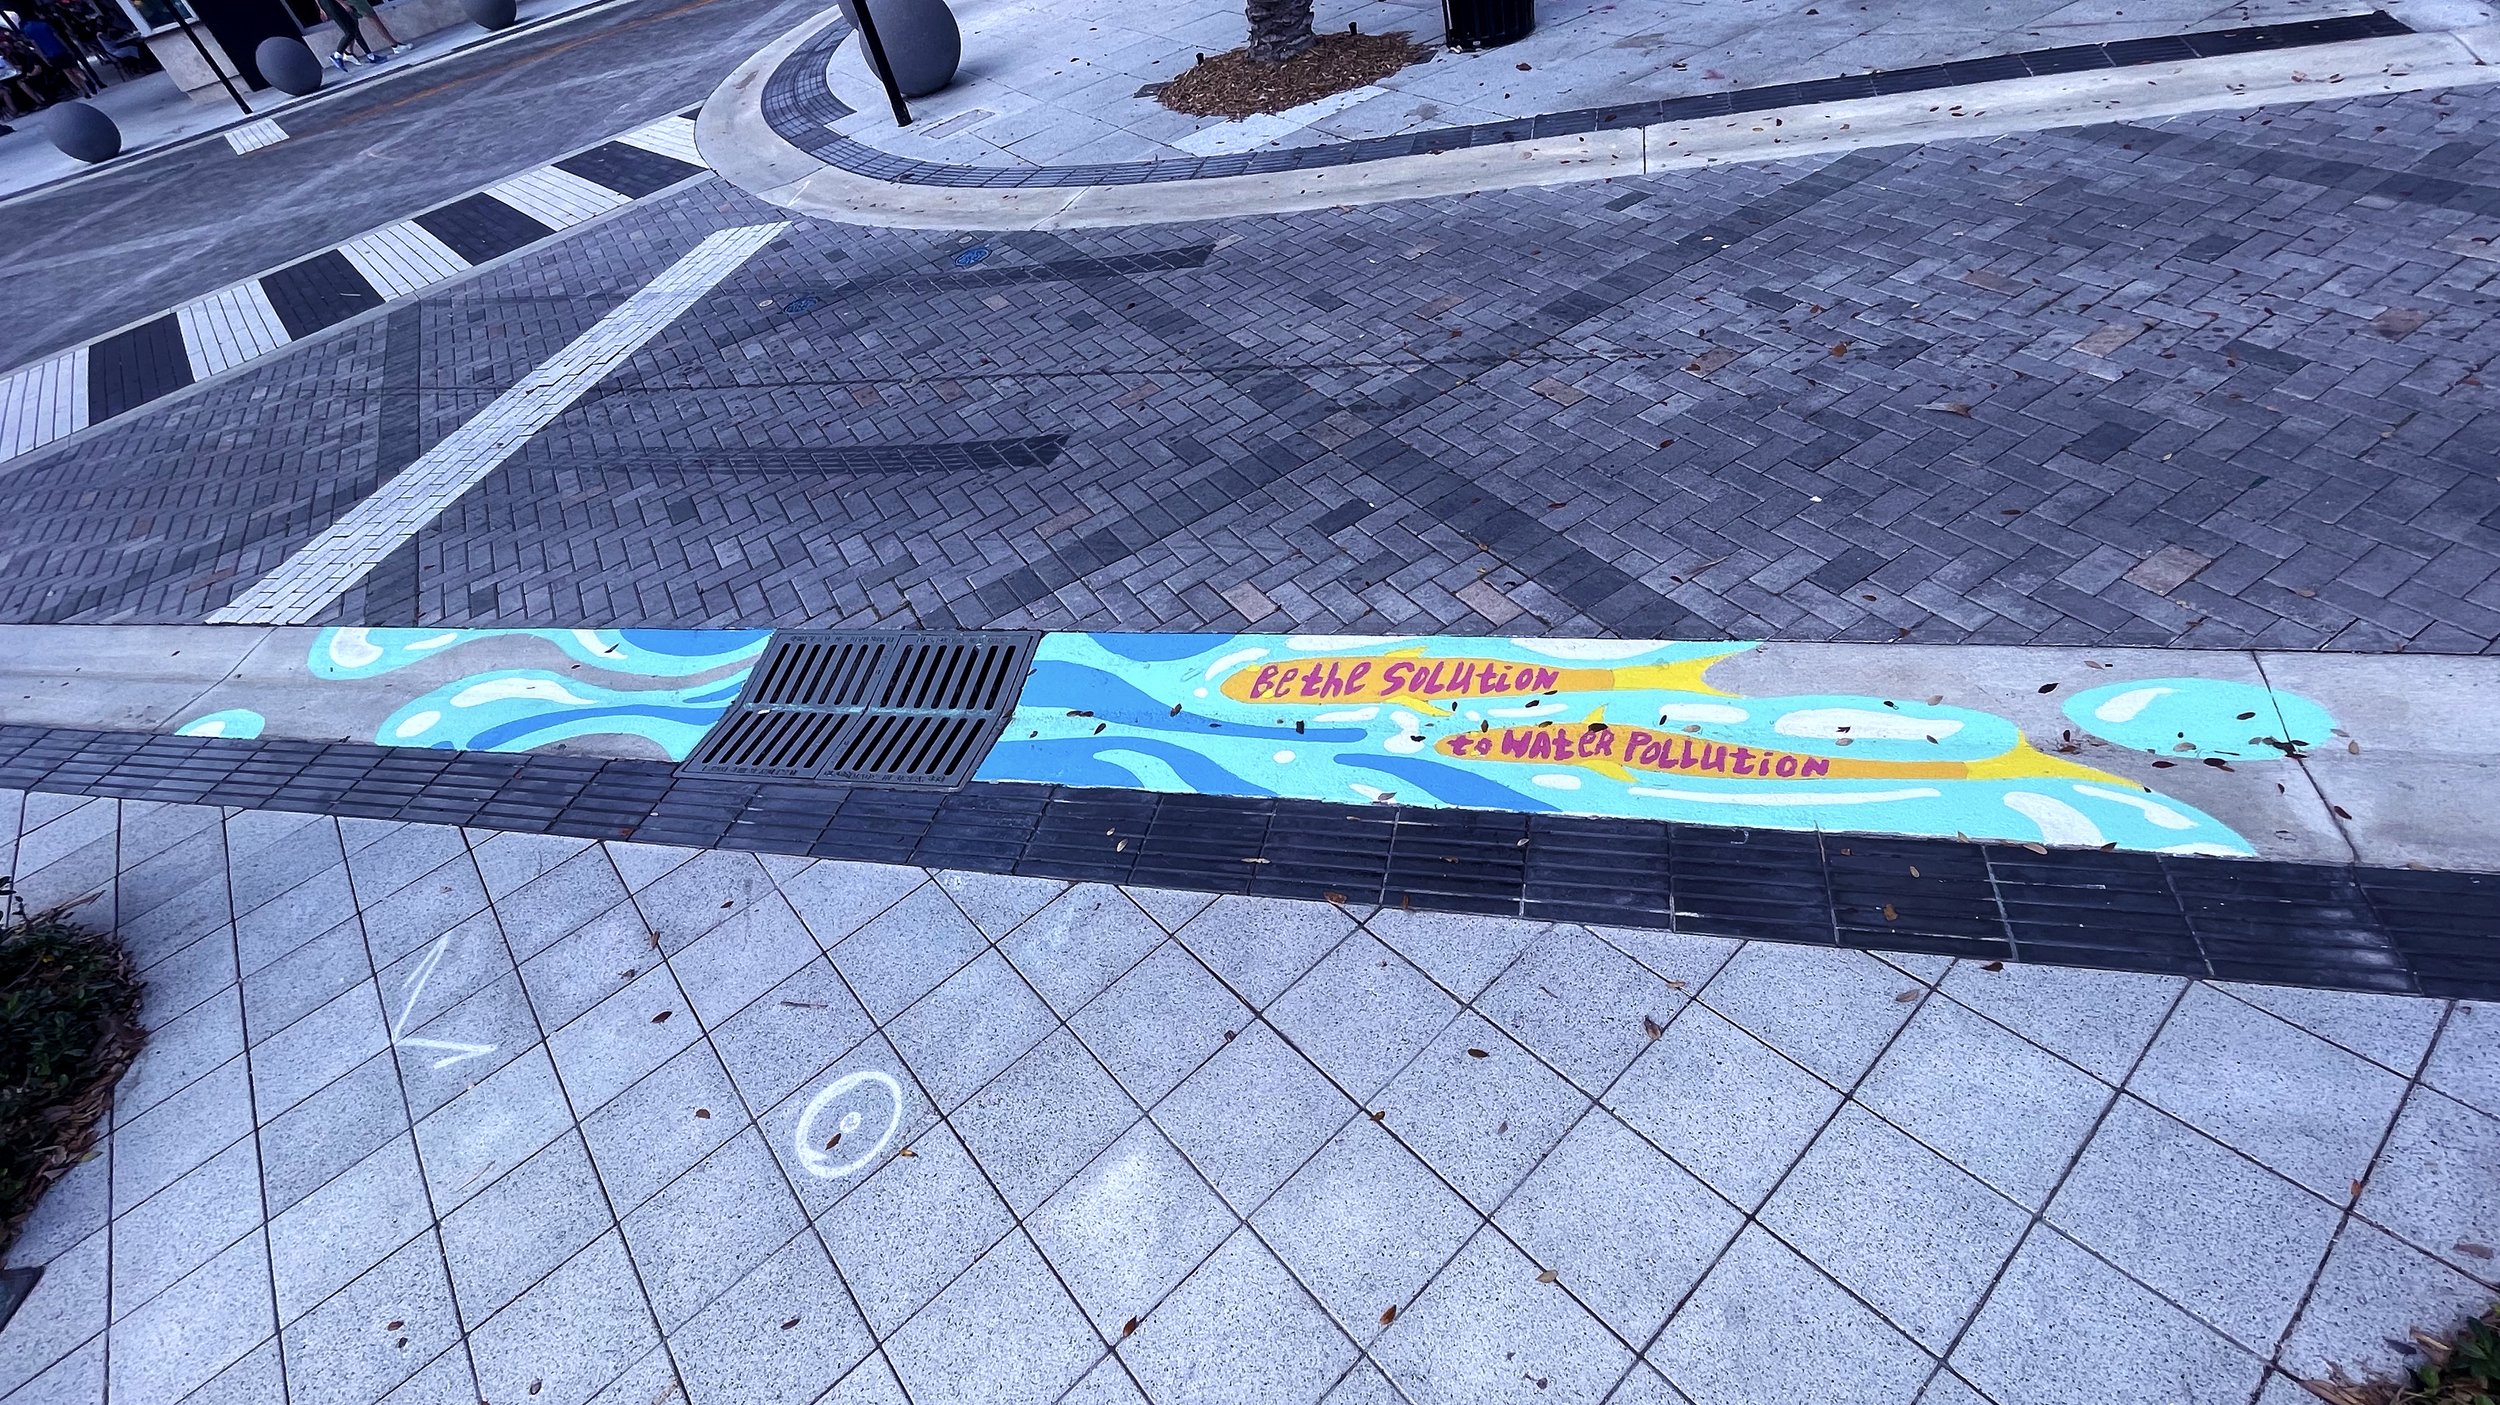   Agua De Vida  acrylic on concrete. 2022    one of twenty storm drain murals commissioned by The City of West Palm Beach Public Art Collection, ArtLife WPB. downtown Clematis St / N Flagler Dr, West Palm Beach, FL, 33401   